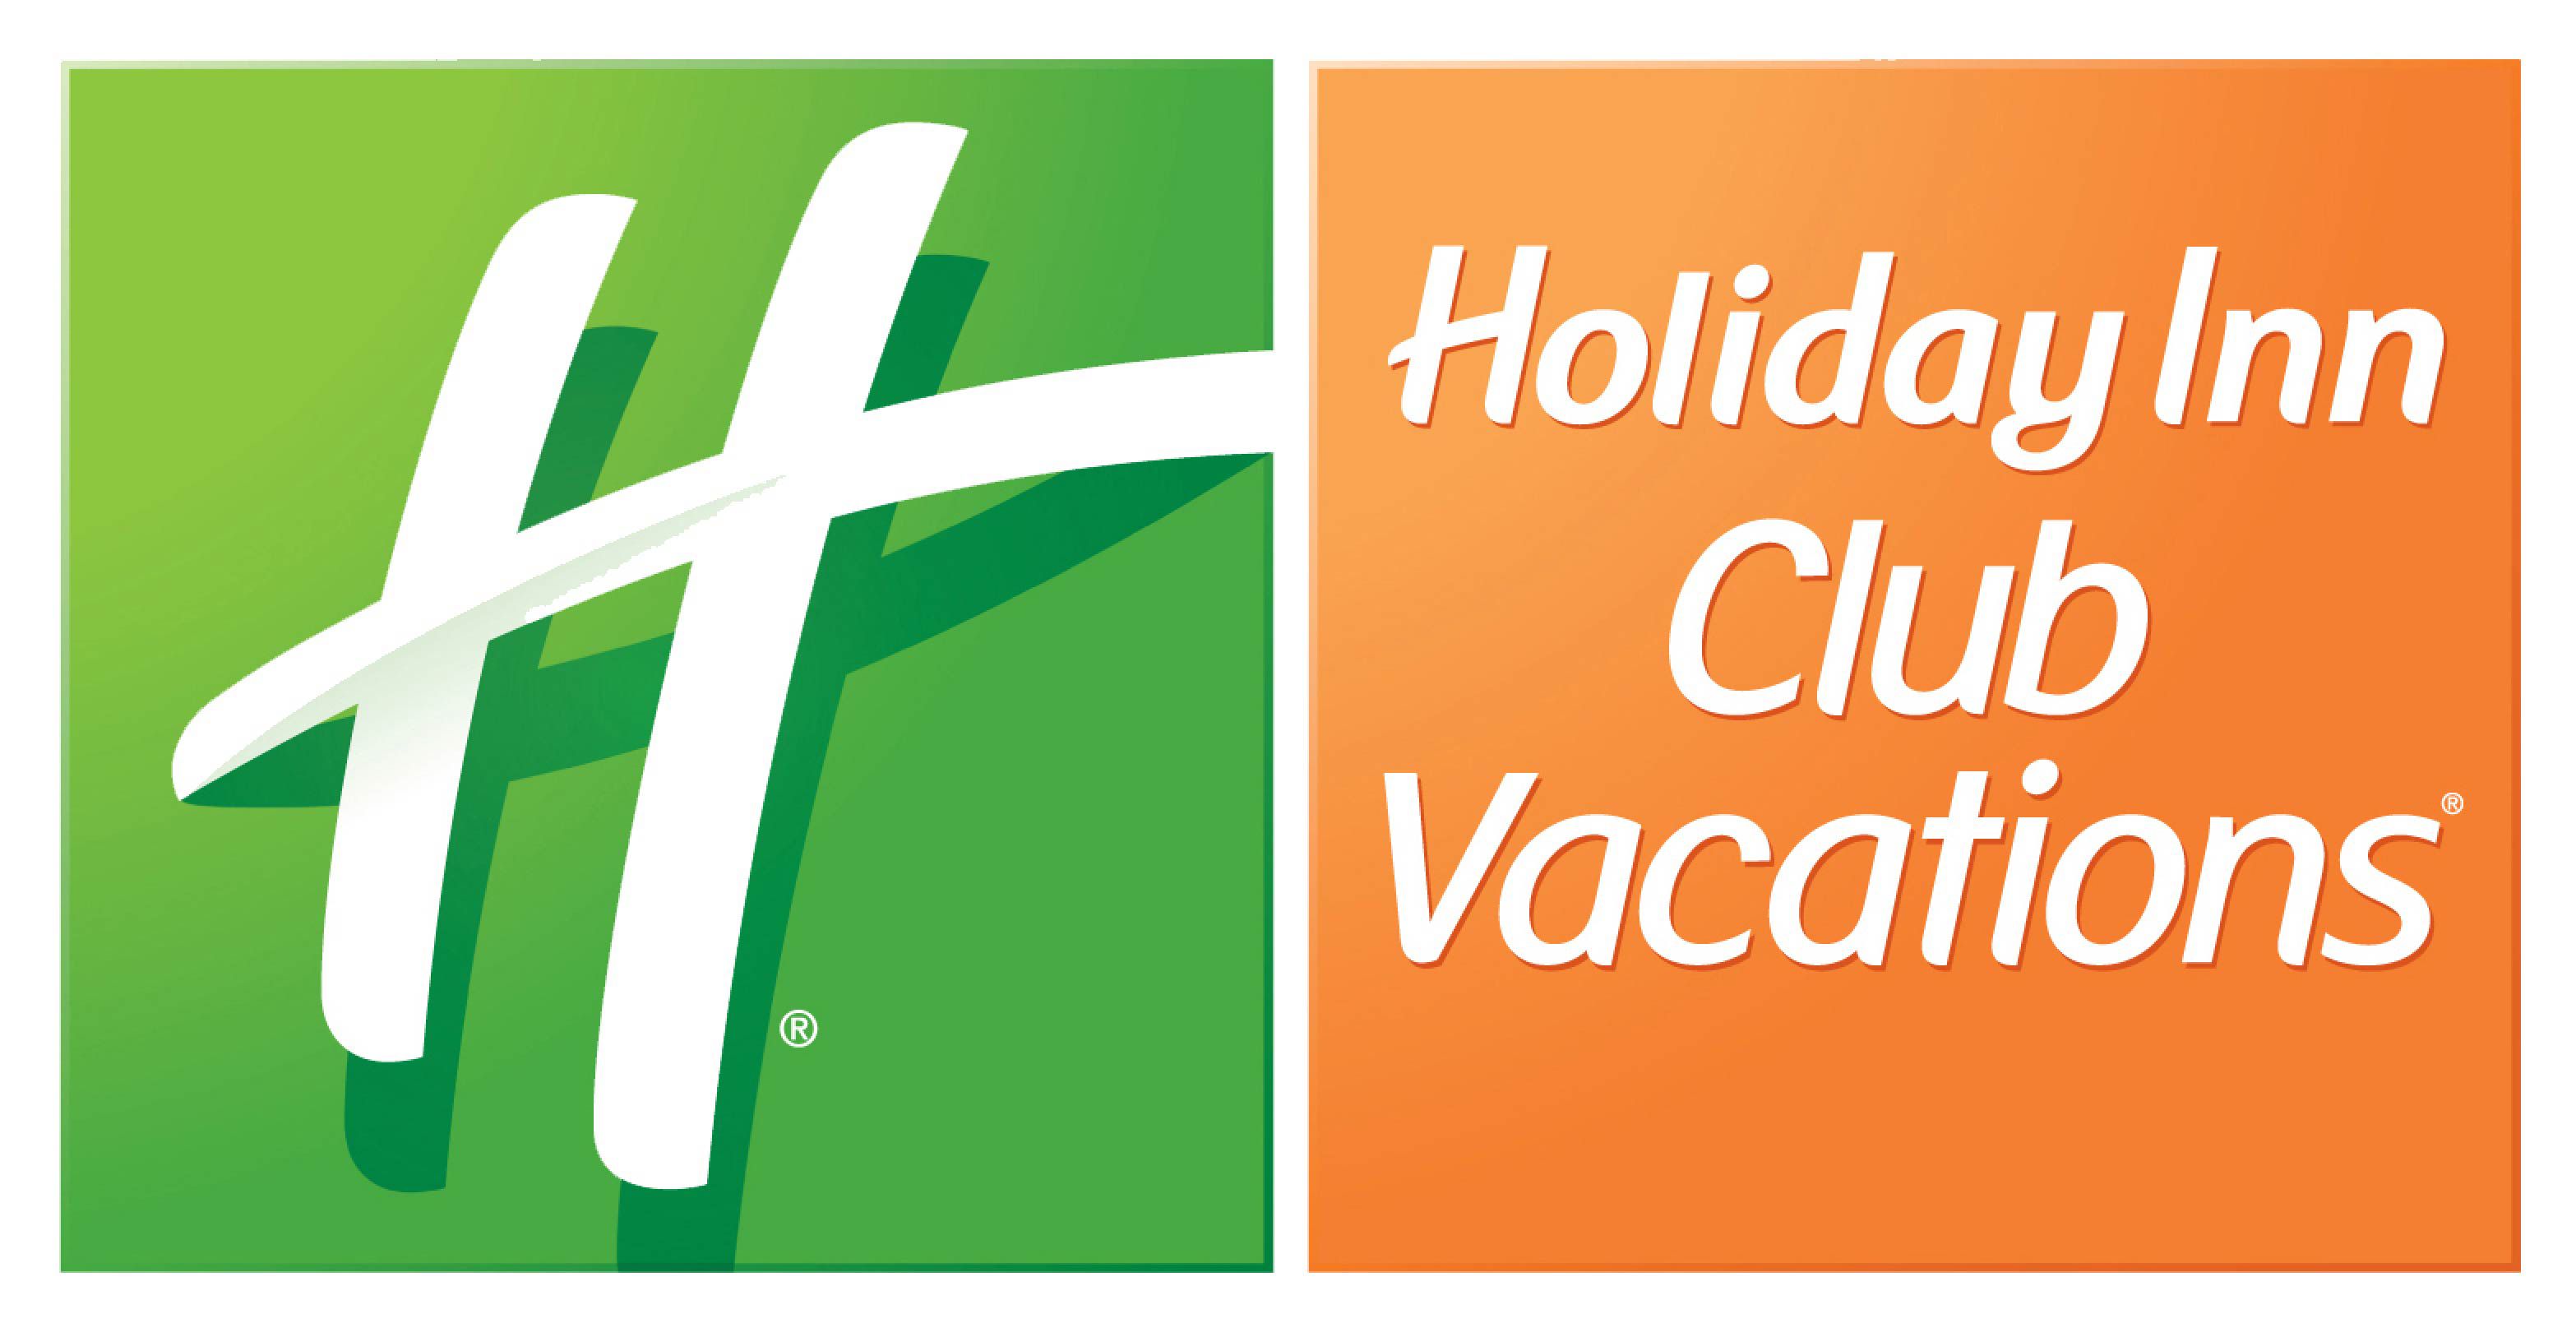 Find & Book Resort Hotels at Holiday Inn Club Vacations